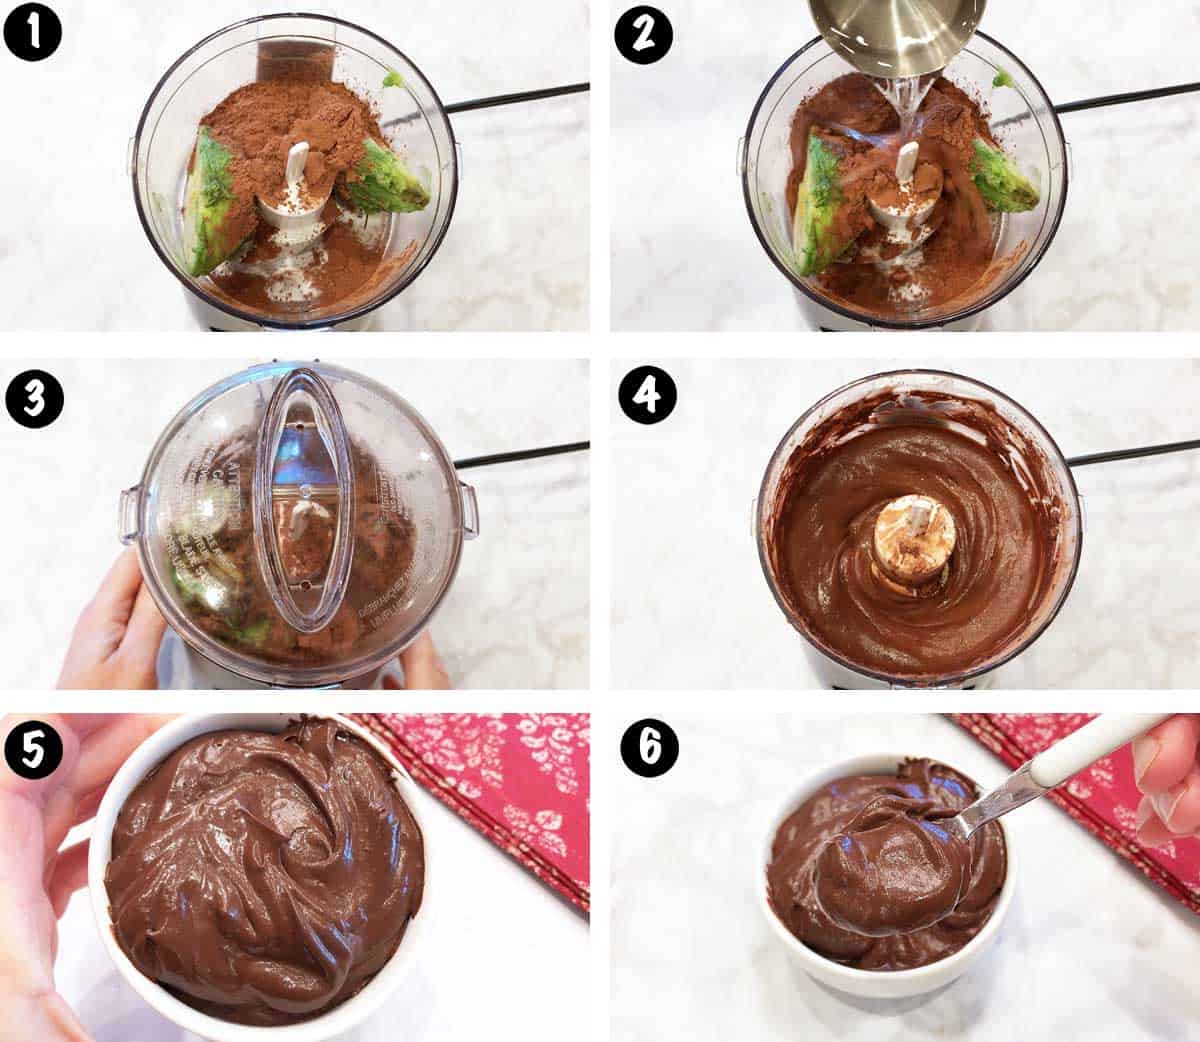 A six-photo collage showing the steps for making an avocado chocolate mousse. 